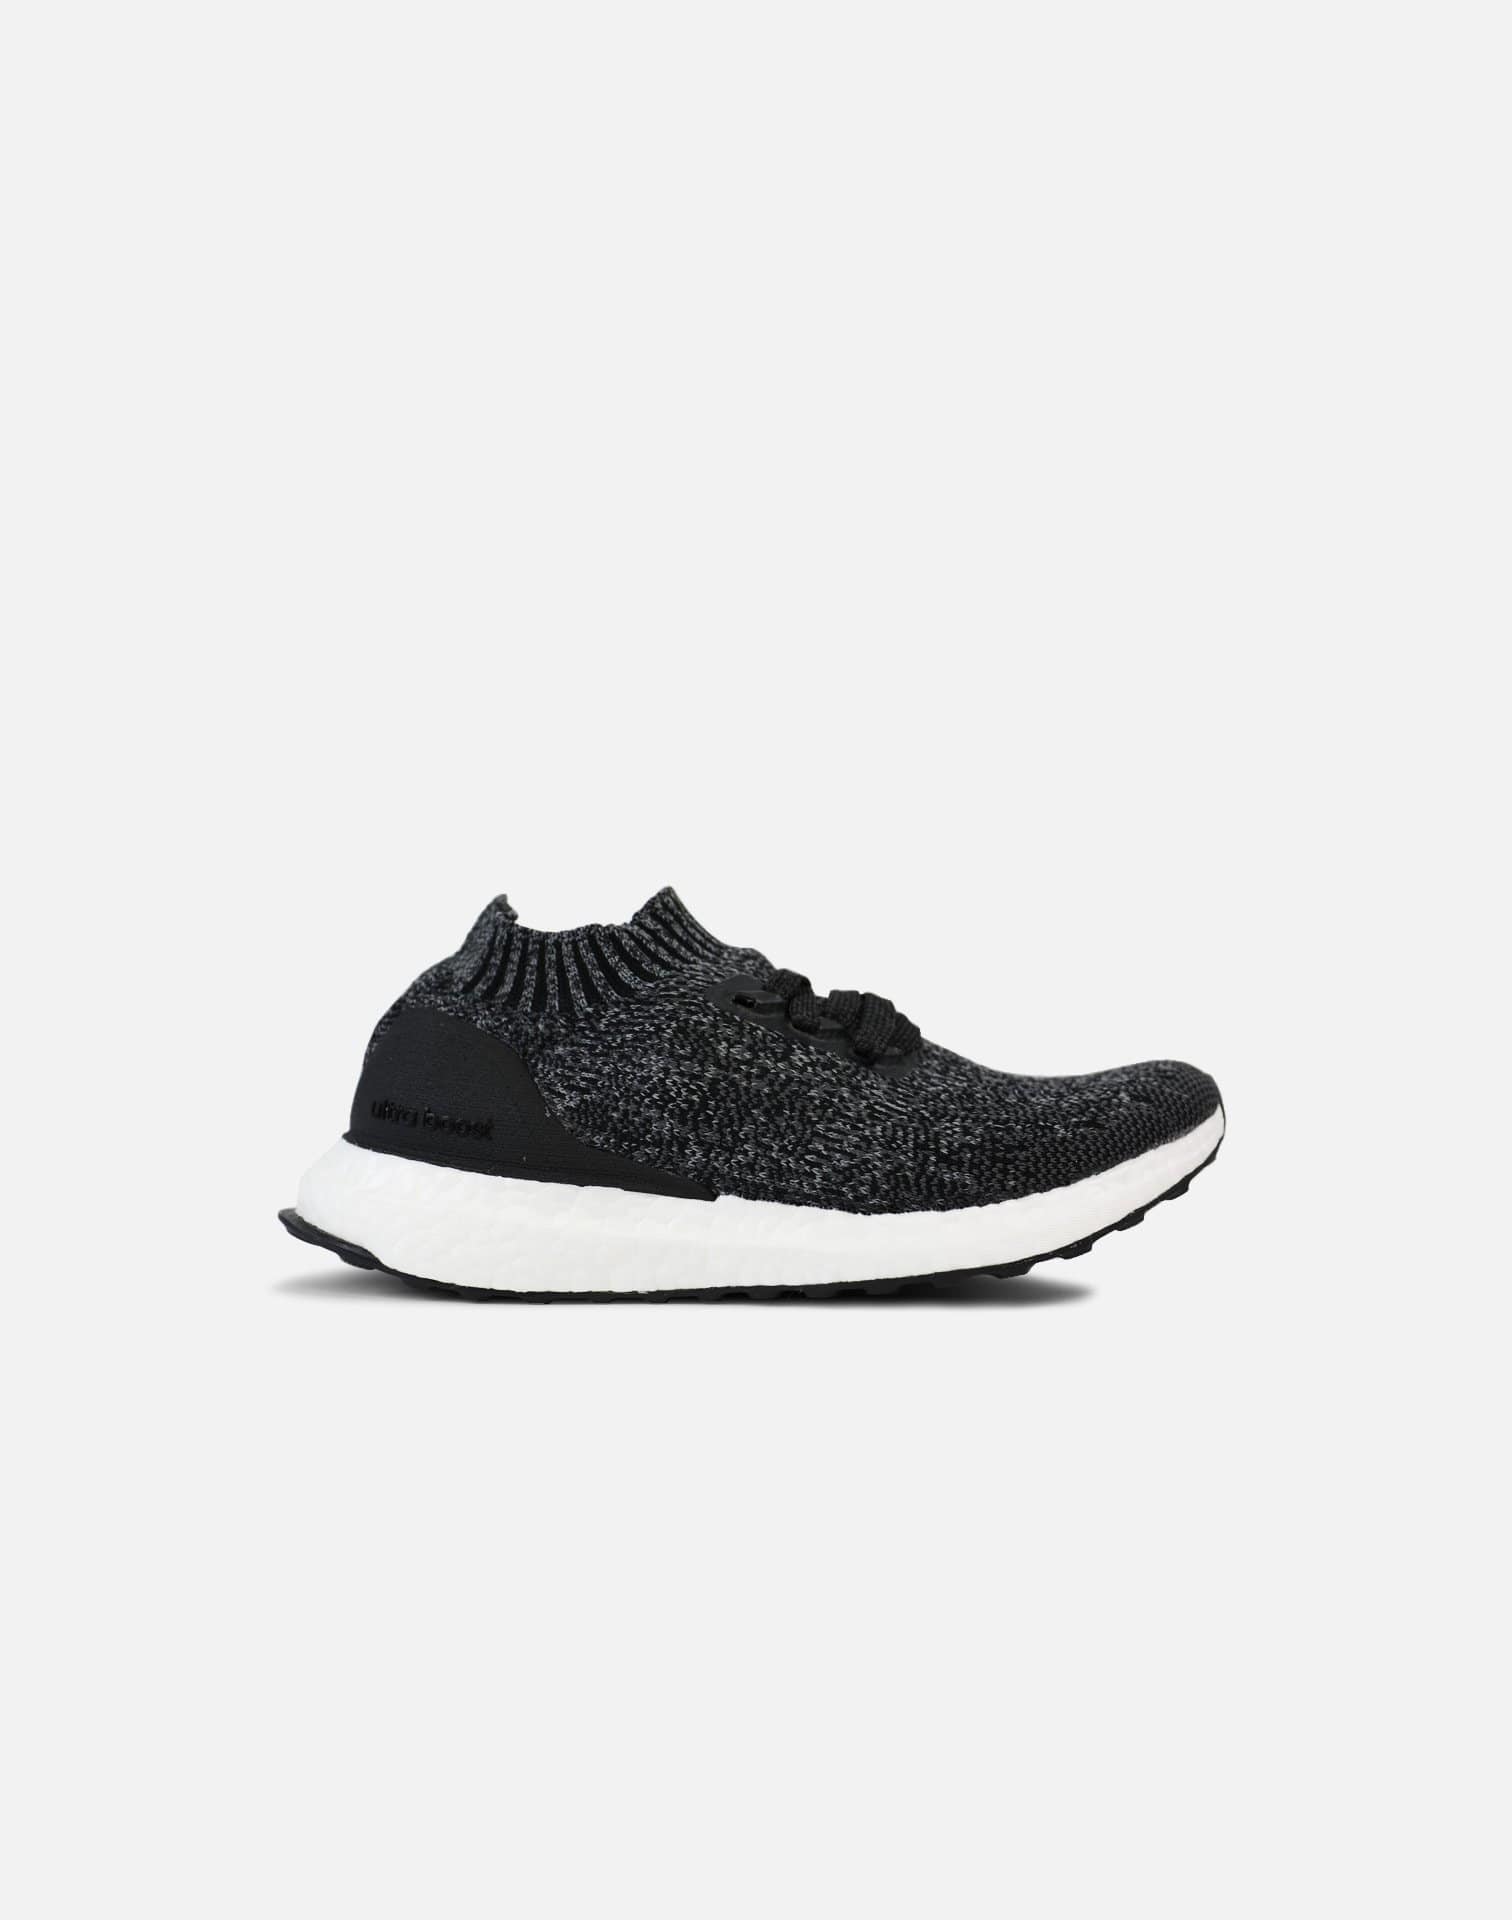 adidas Ultraboost Ungaged (Core Black/Solid Grey-White)